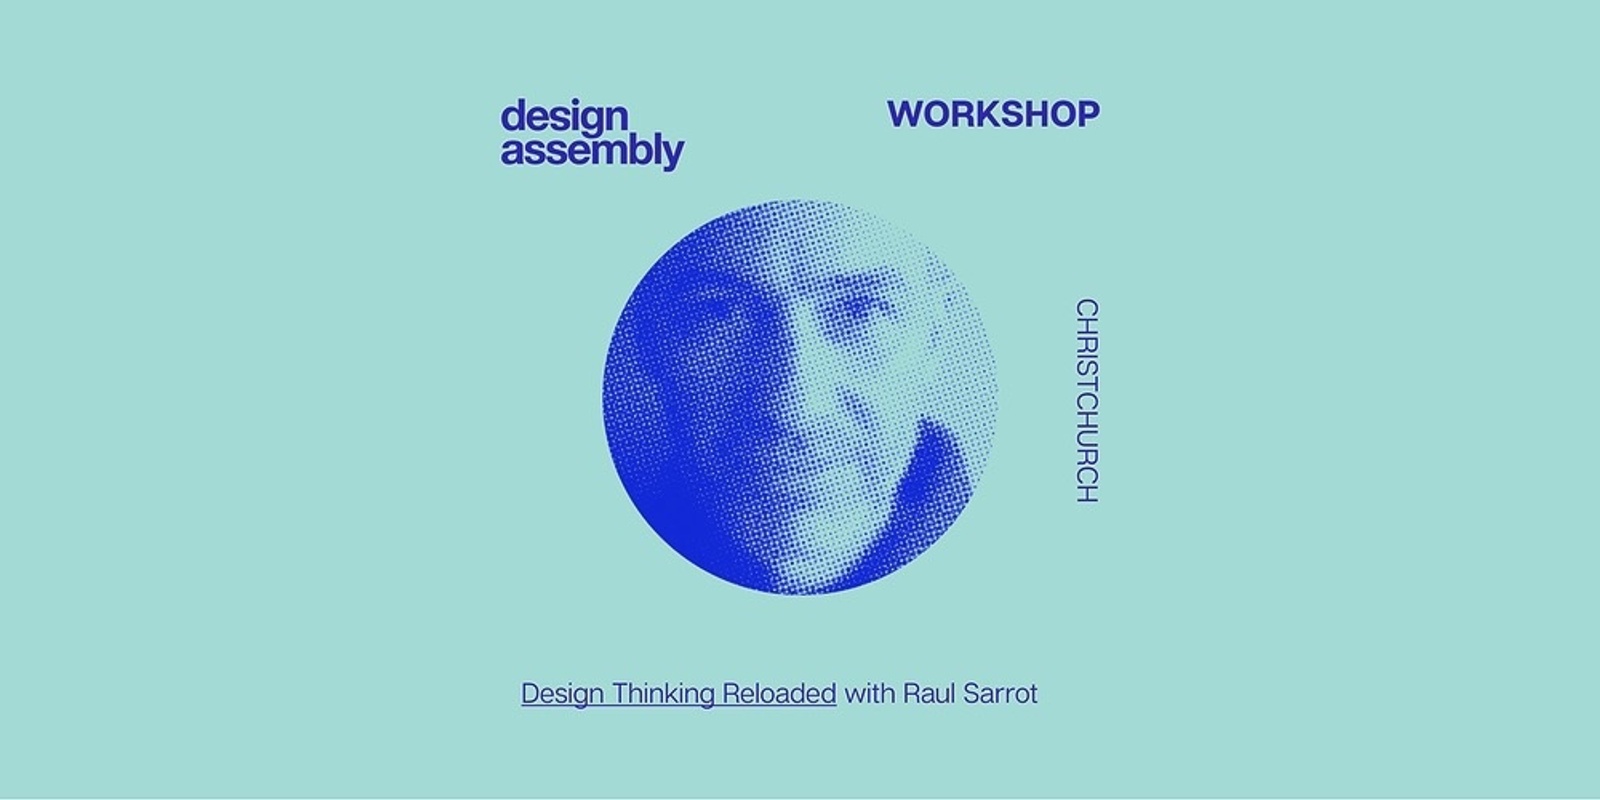 Banner image for CANCELLED - CHRISTCHURCH DA WORKSHOP: Design Thinking Reloaded with Raul Sarrot